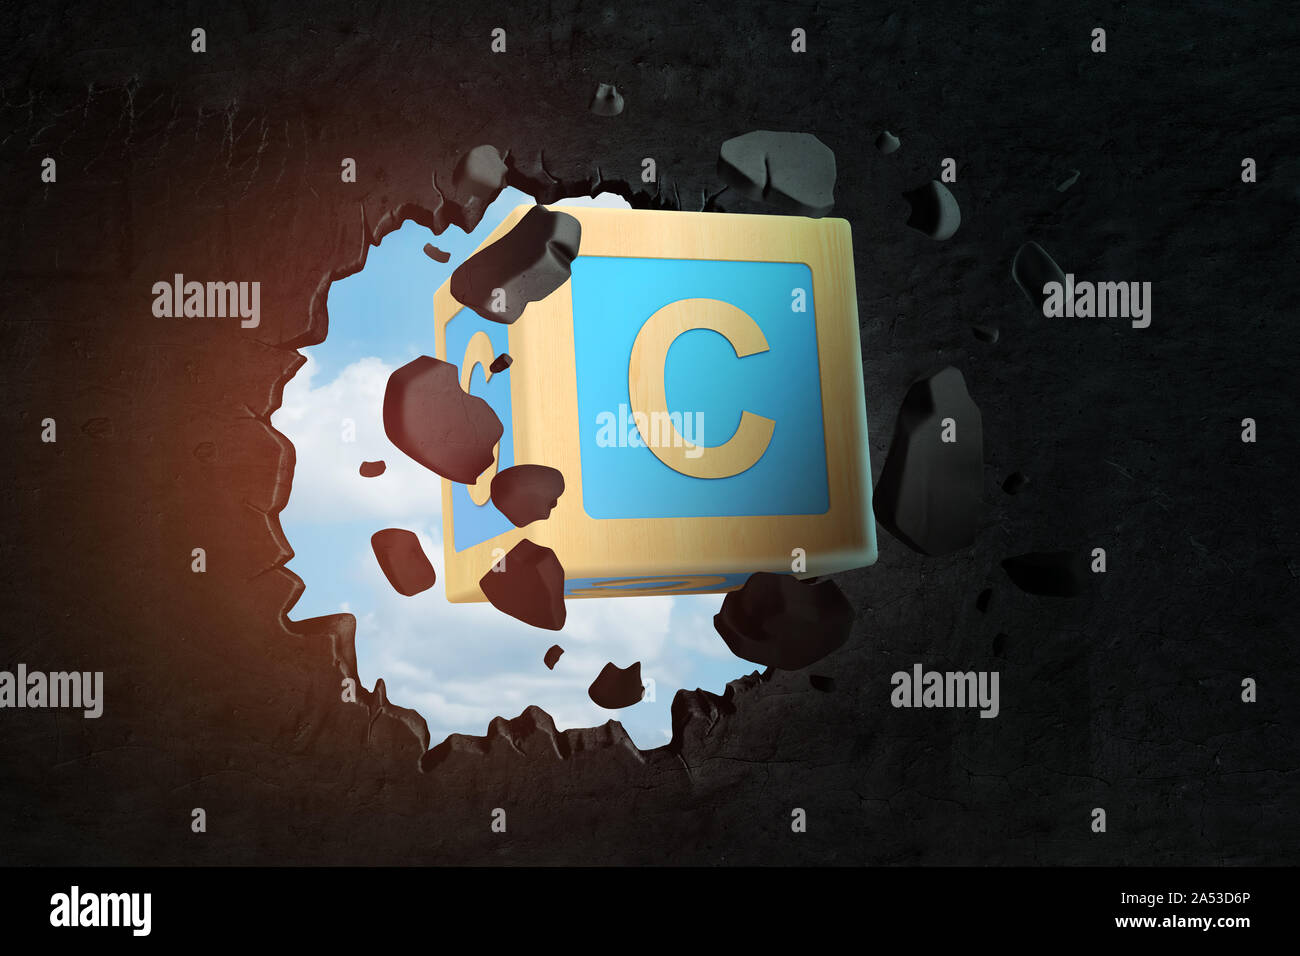 3d closeup rendering of blue ABC block with letter C breaking hole in black wall with blue sky seen through hole. Stock Photo